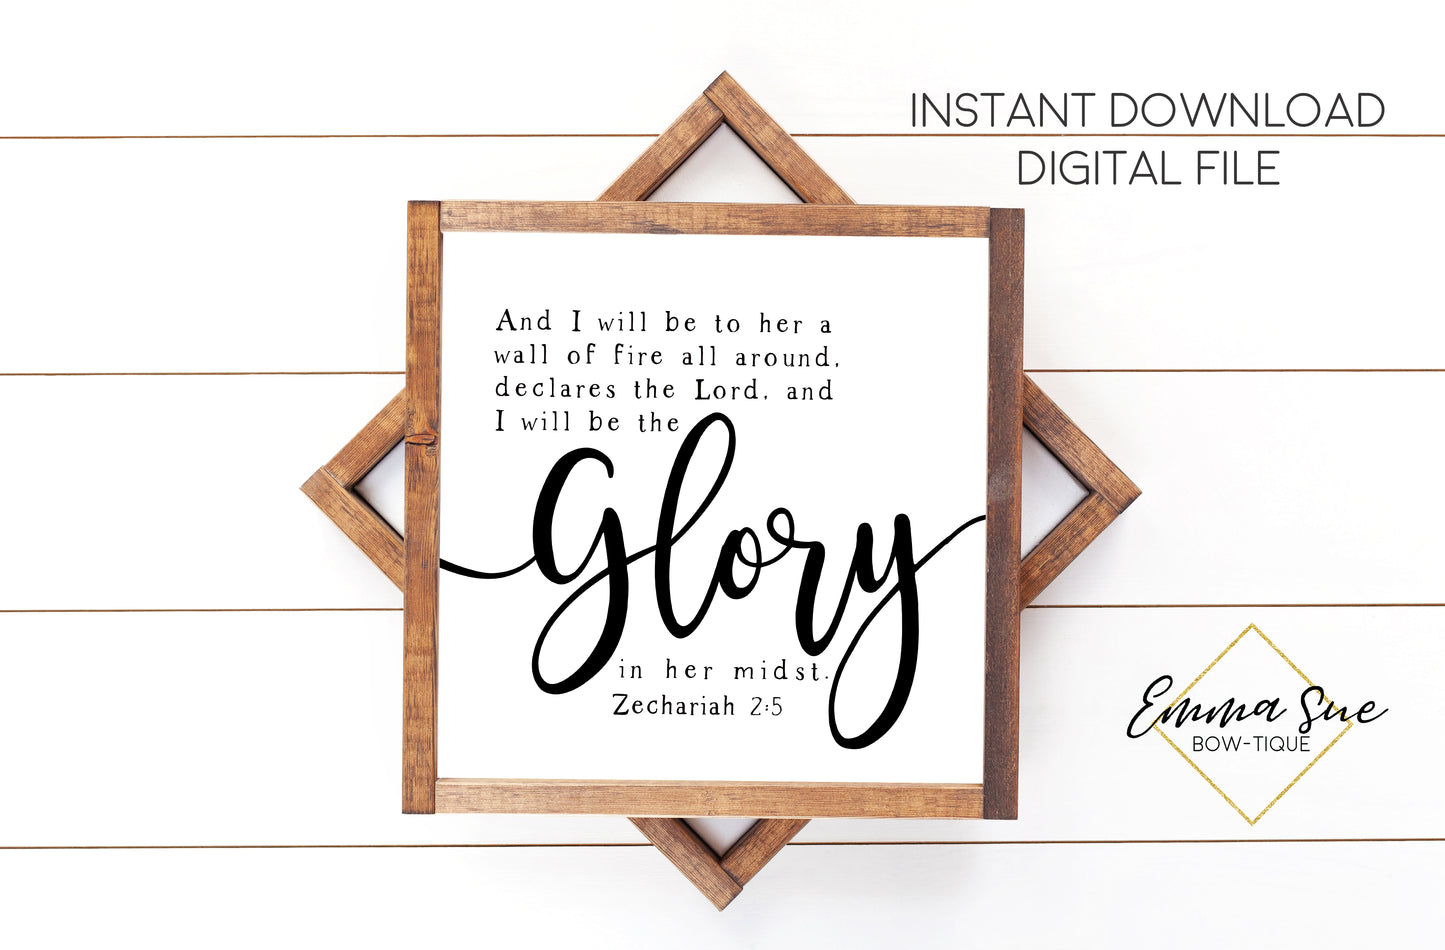 And I will be to her a wall of fire all around declares the Lord and I will be the Glory in her Midst - Zechariah 2:5 - Christian Farmhouse Printable Art Sign Digital File